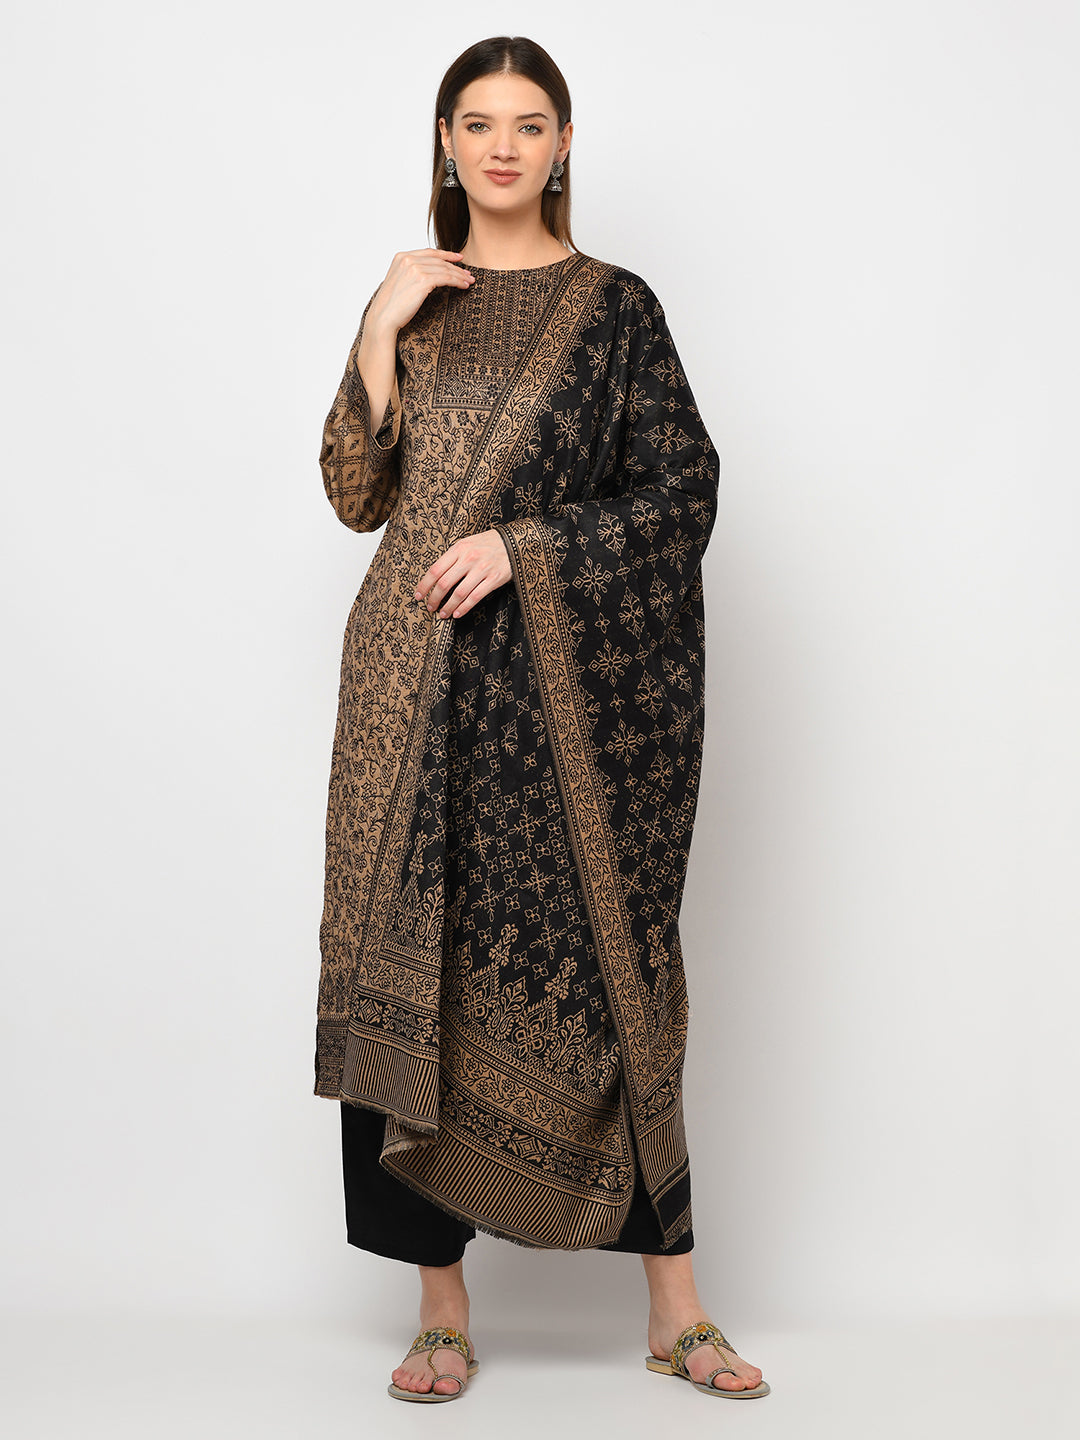 Acro Wool Camel Dress Material with Stole